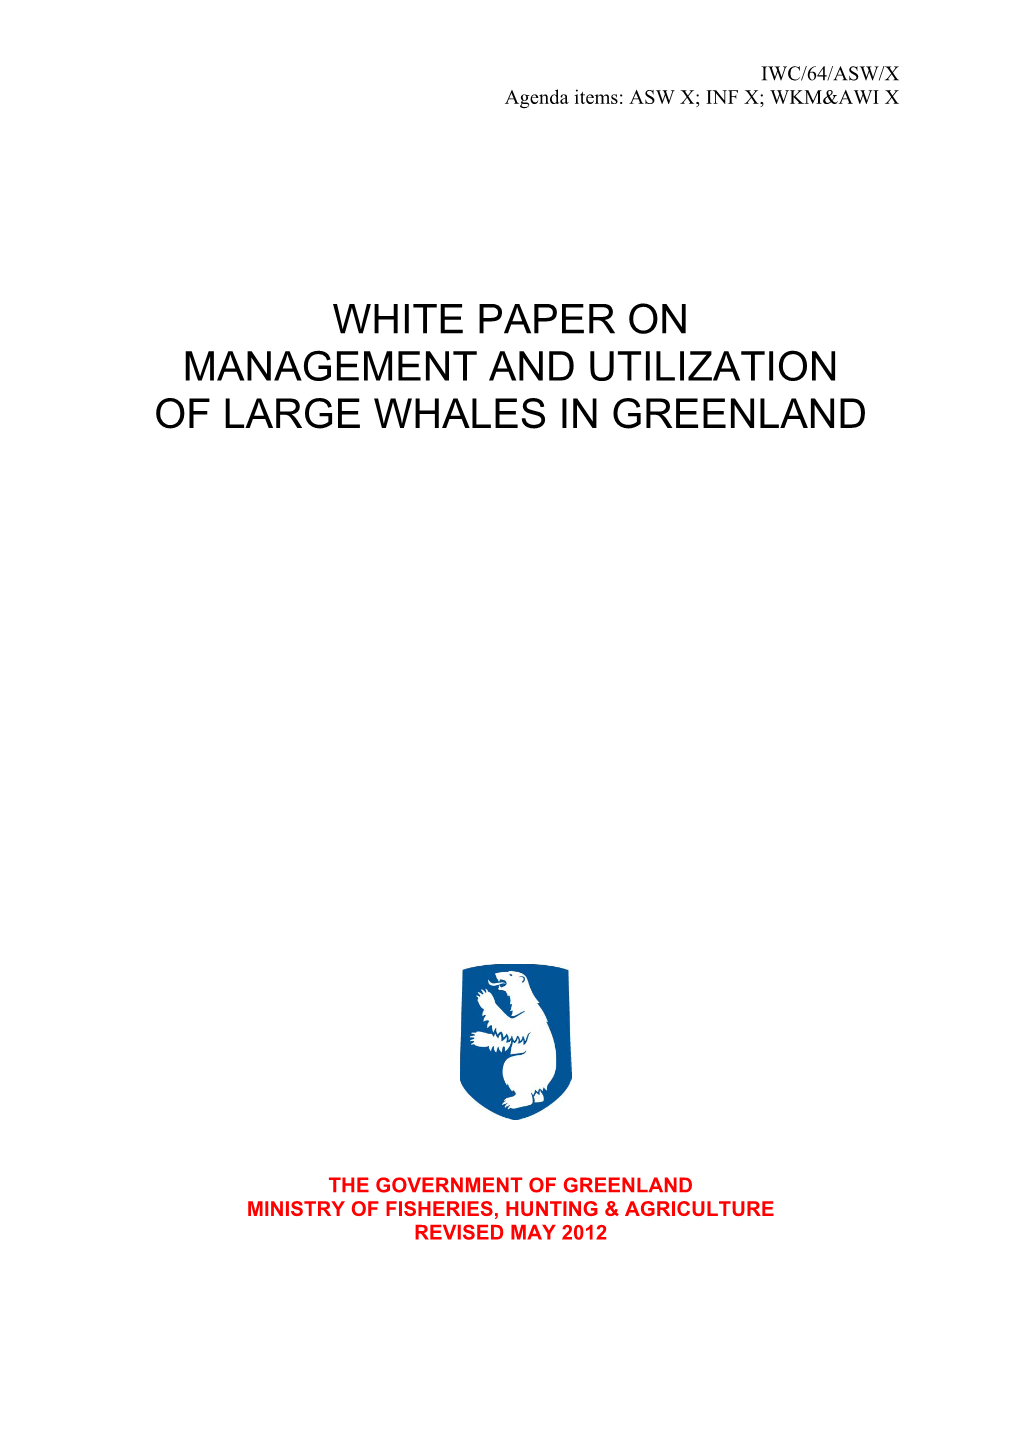 White Paper on Management and Utilization of Large Whales in Greenland